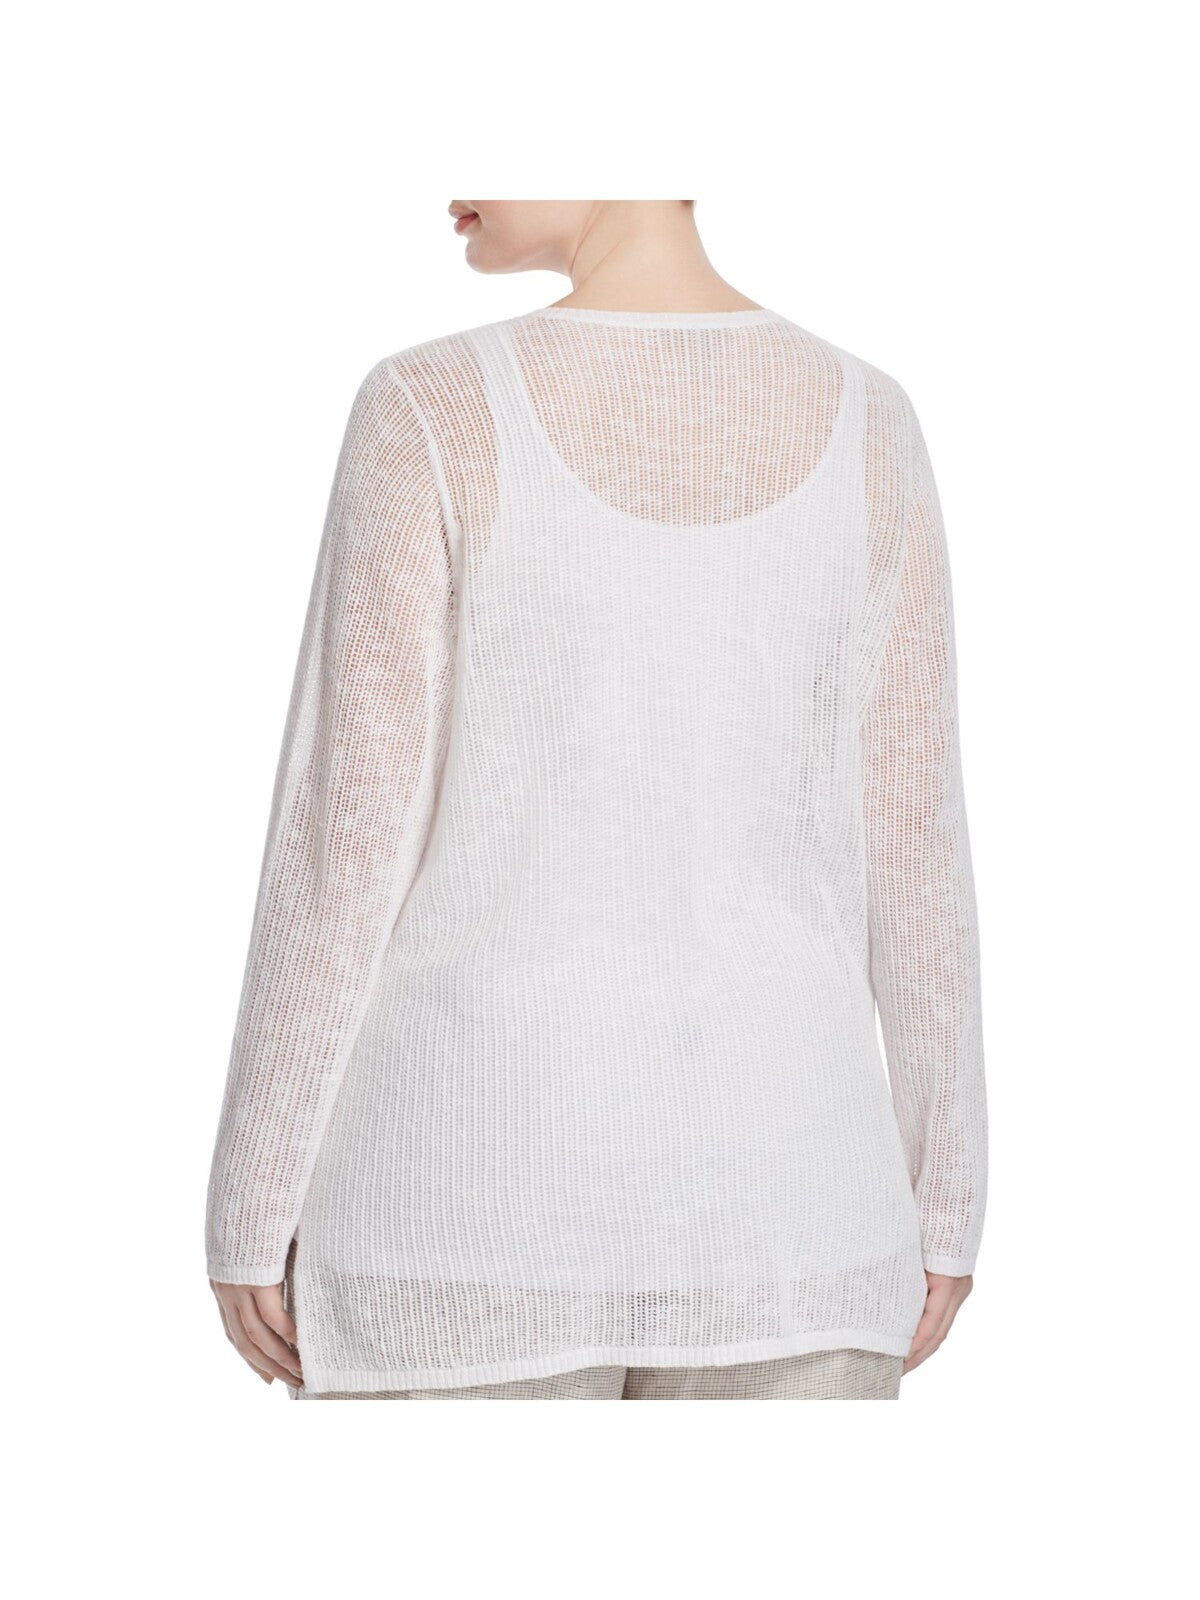 EILEEN FISHER Womens White Stretch Sheer Slitted Long Sleeve V Neck Sweater Plus 1X